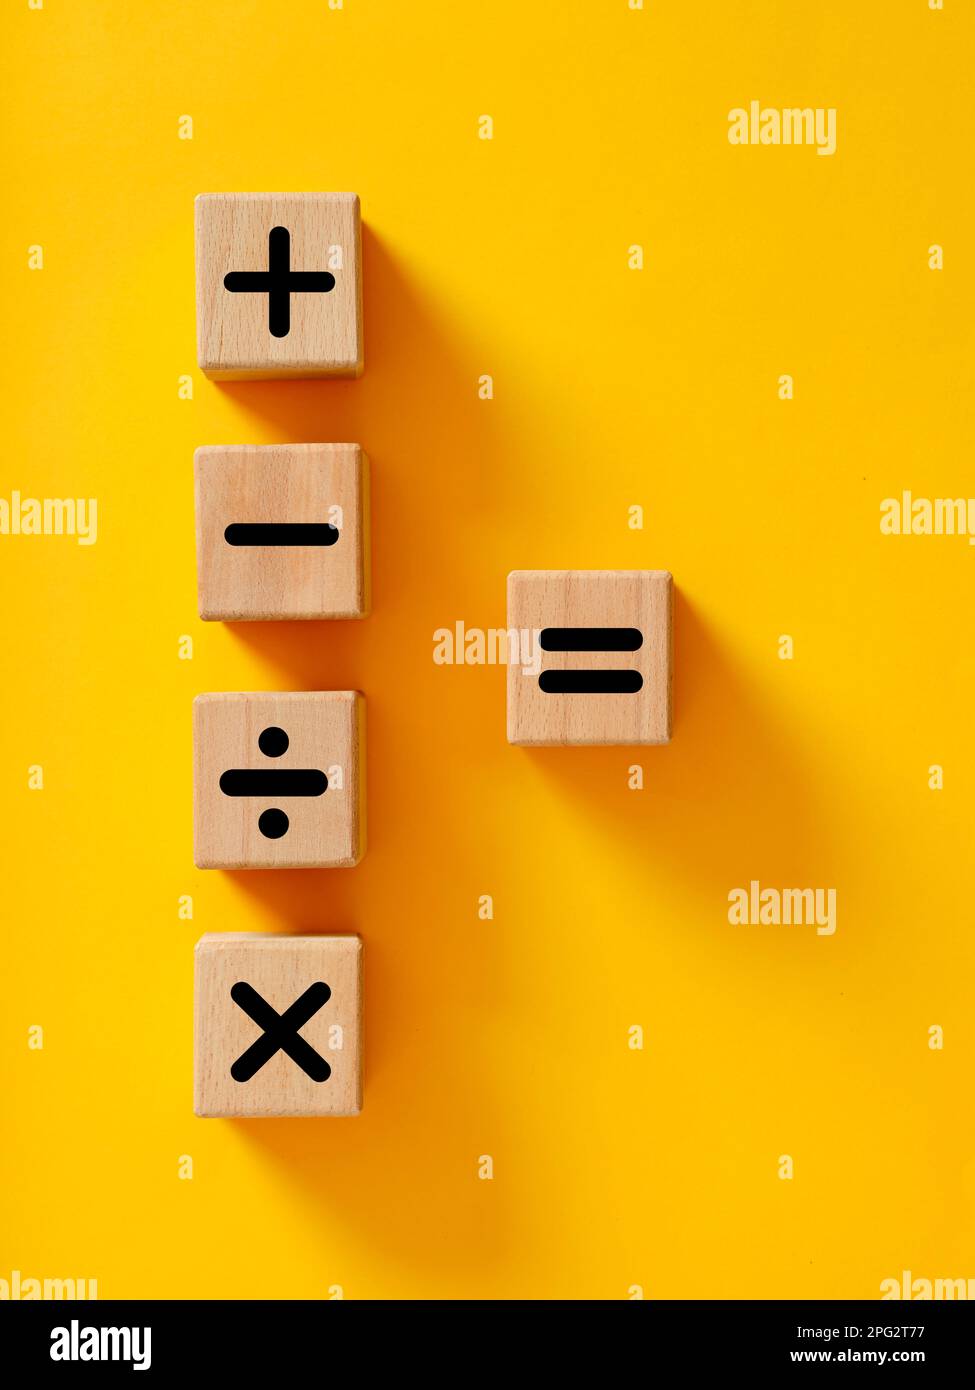 Basic mathematical operations symbols. Plus, minus, multiply, divide and equal symbols on wooden cubes. Mathematic or math education and basic calcula Stock Photo